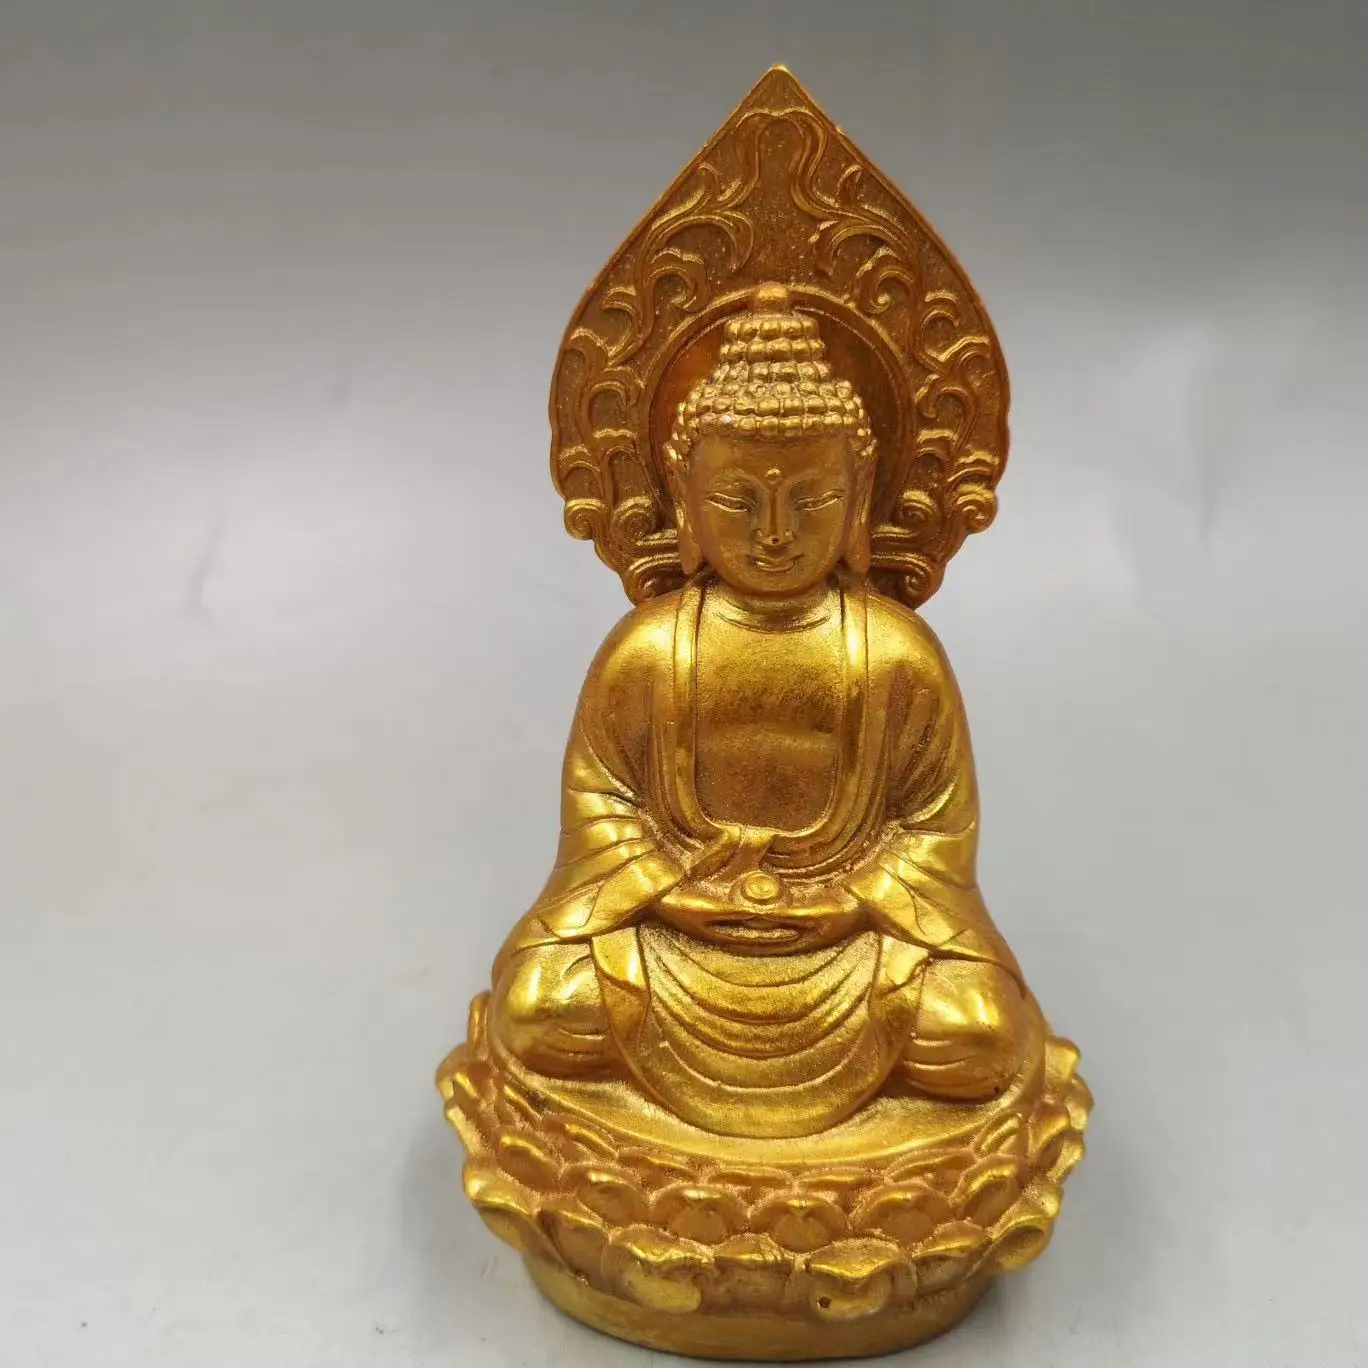 

Play wholesale copper thickened gilded Tathagata Buddha ornaments bronze rural collection of old things at home.